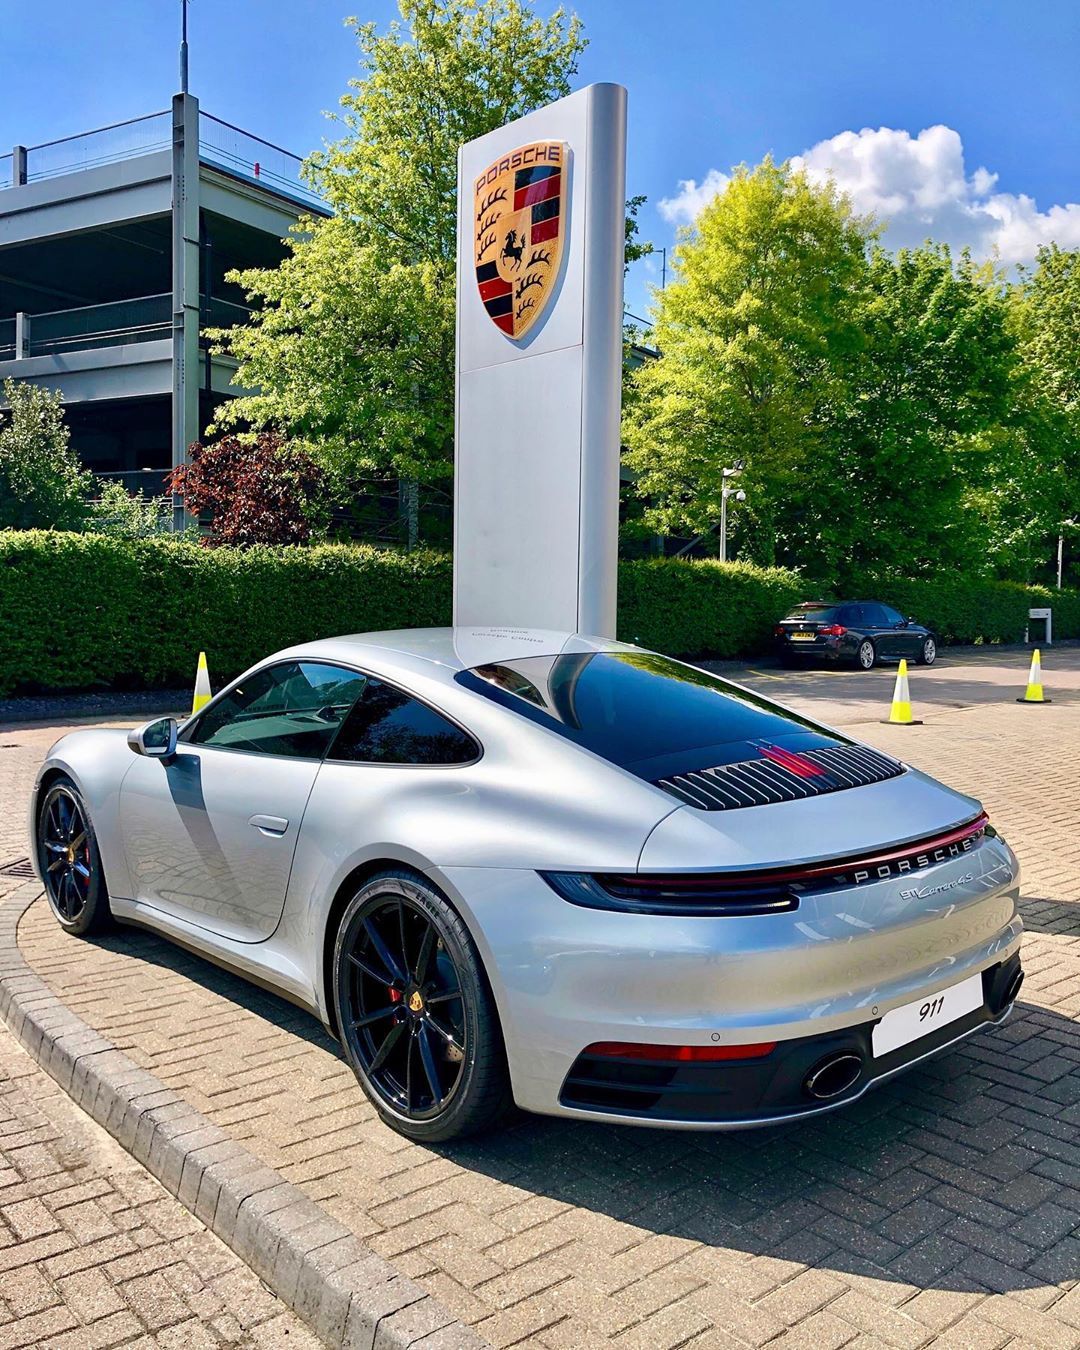 Tristan DSO | AMG ? Porsche on Instagram: “To my eye, can’t remember the last time a non GT 911 looked this good☝??? #porsche #911 #992 #carrera4s #gt3 ———————————————————————————…”